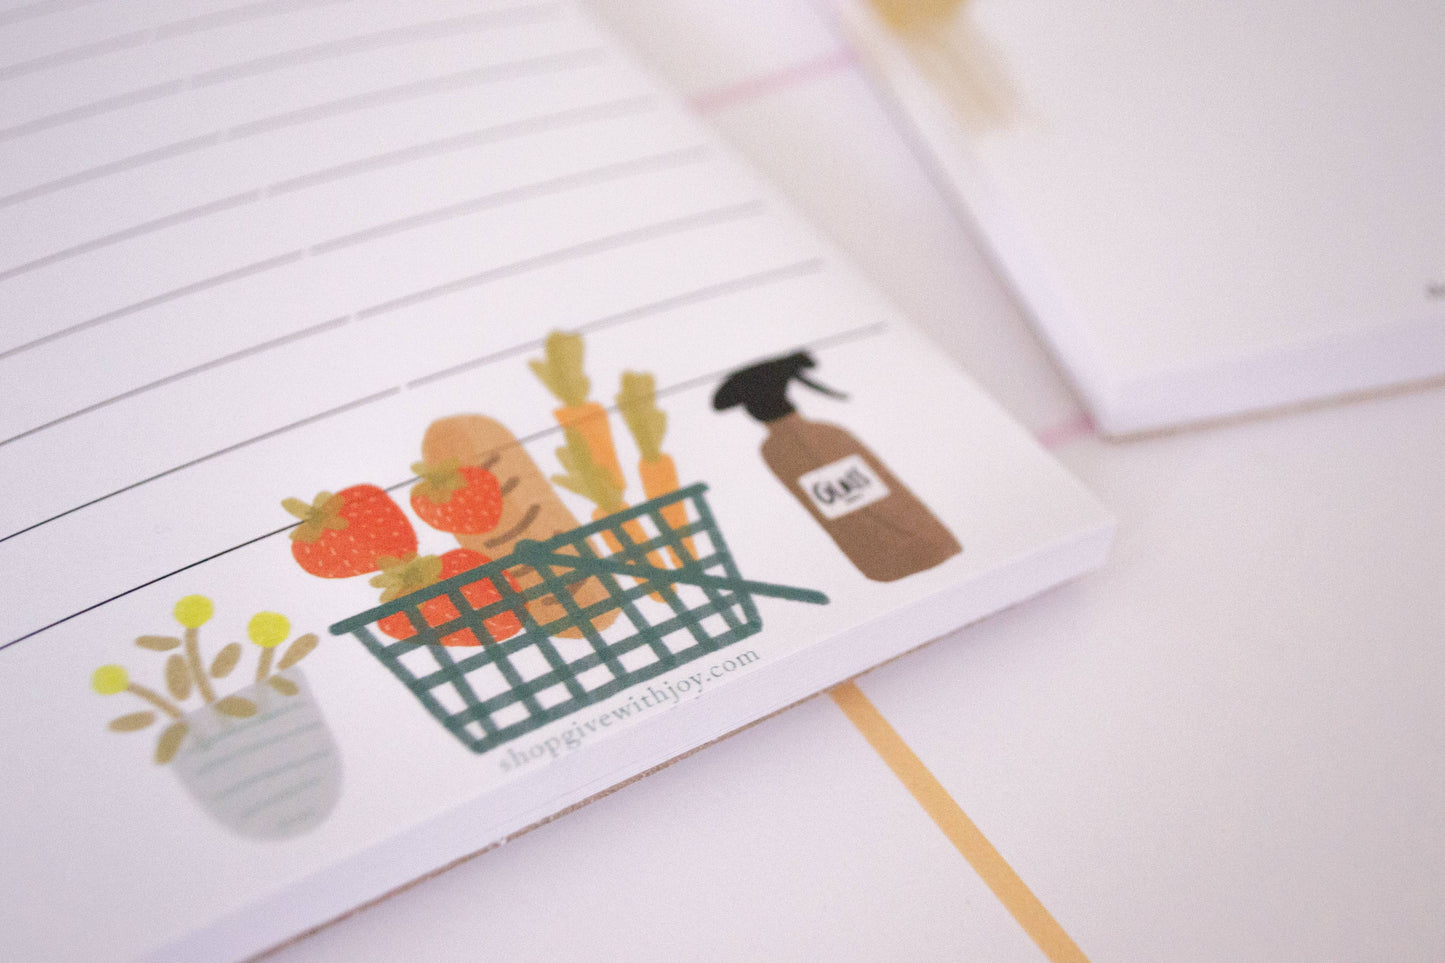 Shopping List Notepad, Basket of Goodies